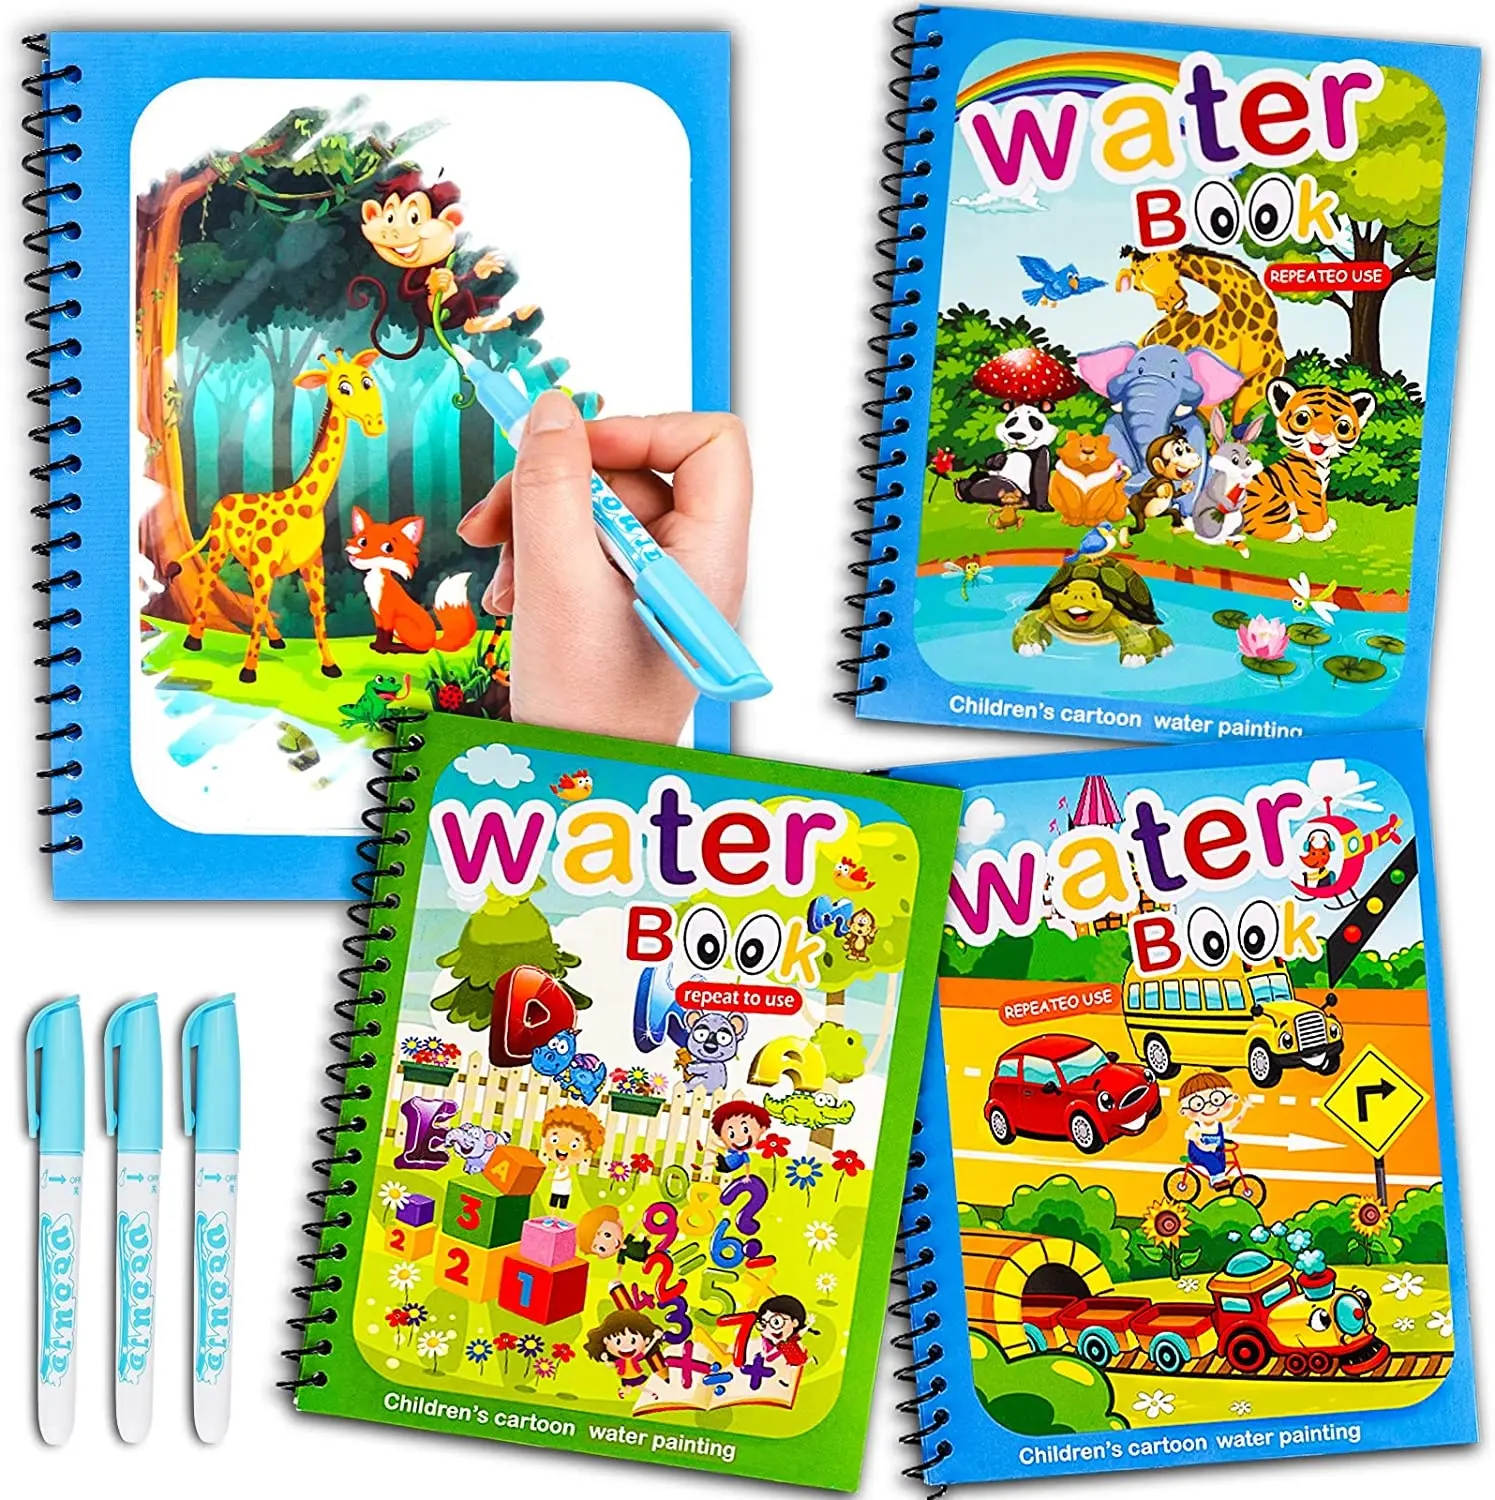 Hot-selling Reusable children's cartoon water Doodle Book With Pen for Kids Magic Water ink Drawing Painting Book